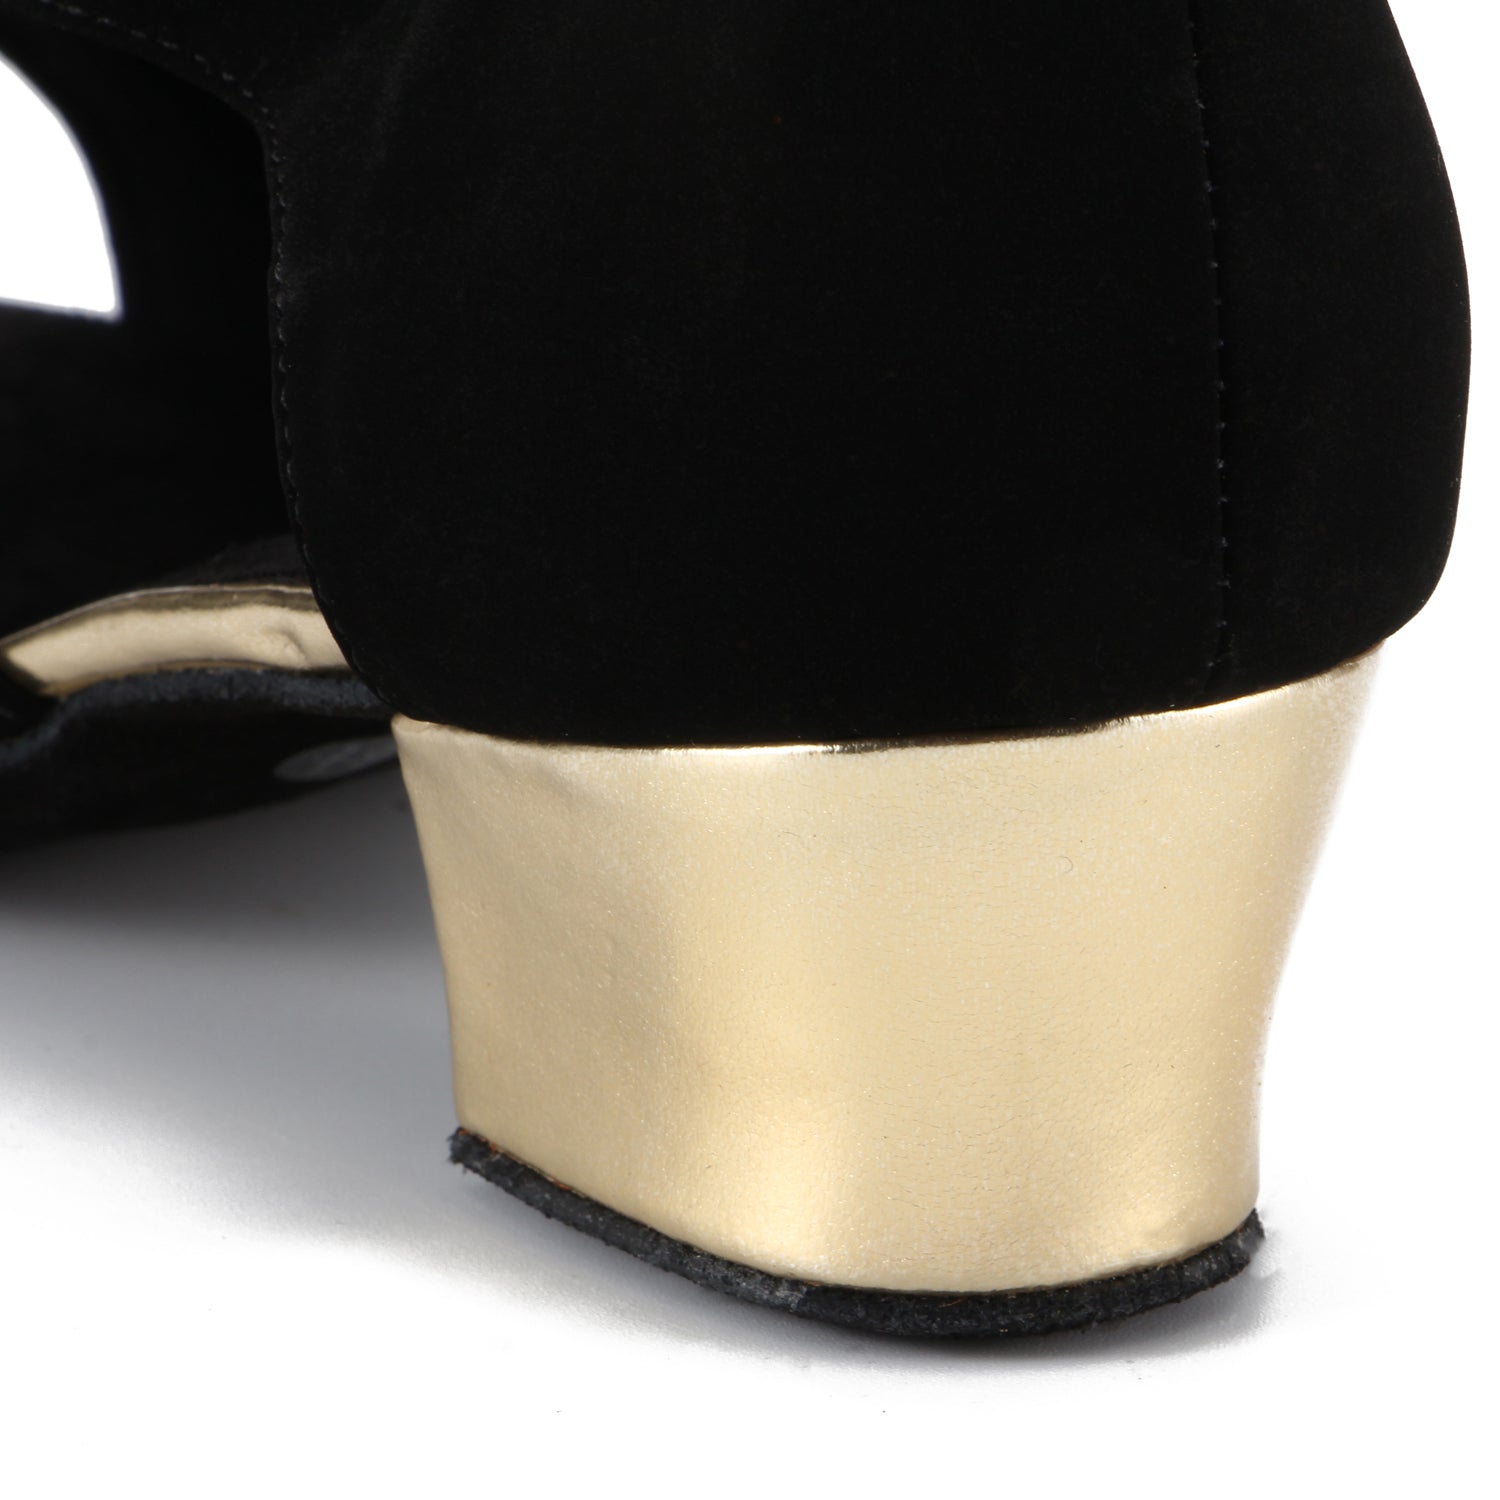 Women Ballroom Dancing Shoes with Suede Sole, Lace-up Open-toe Design in Black and Gold for Tango Latin Practice (PD-3004A)5